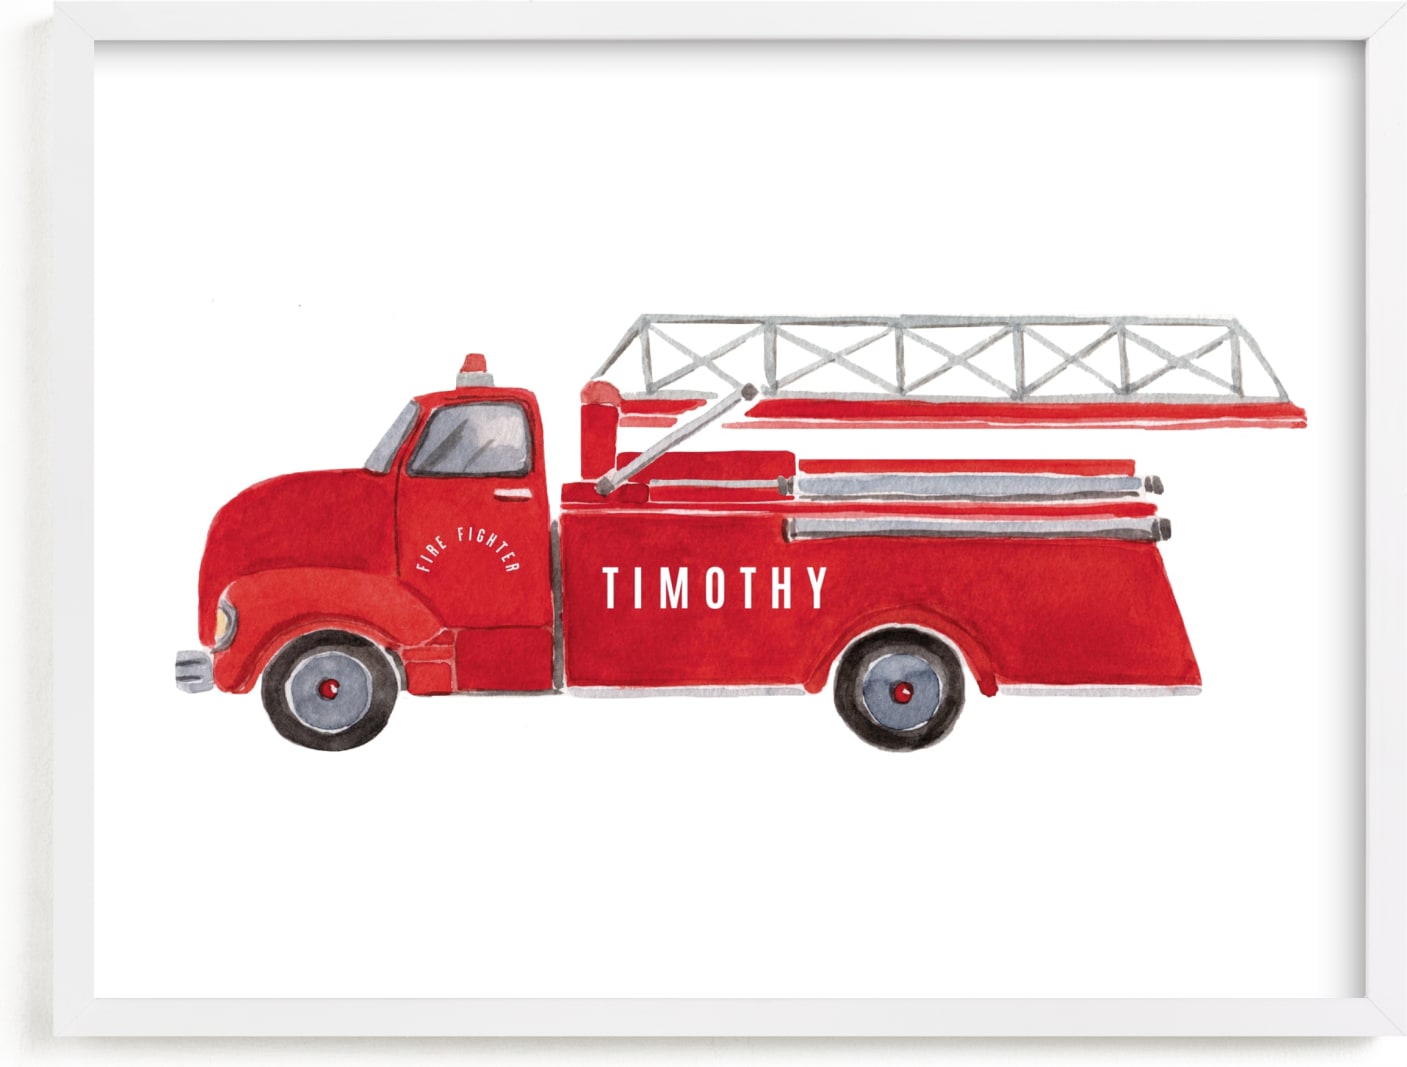 This is a red personalized art for kid by frau brandt called Vintage FireTruck.